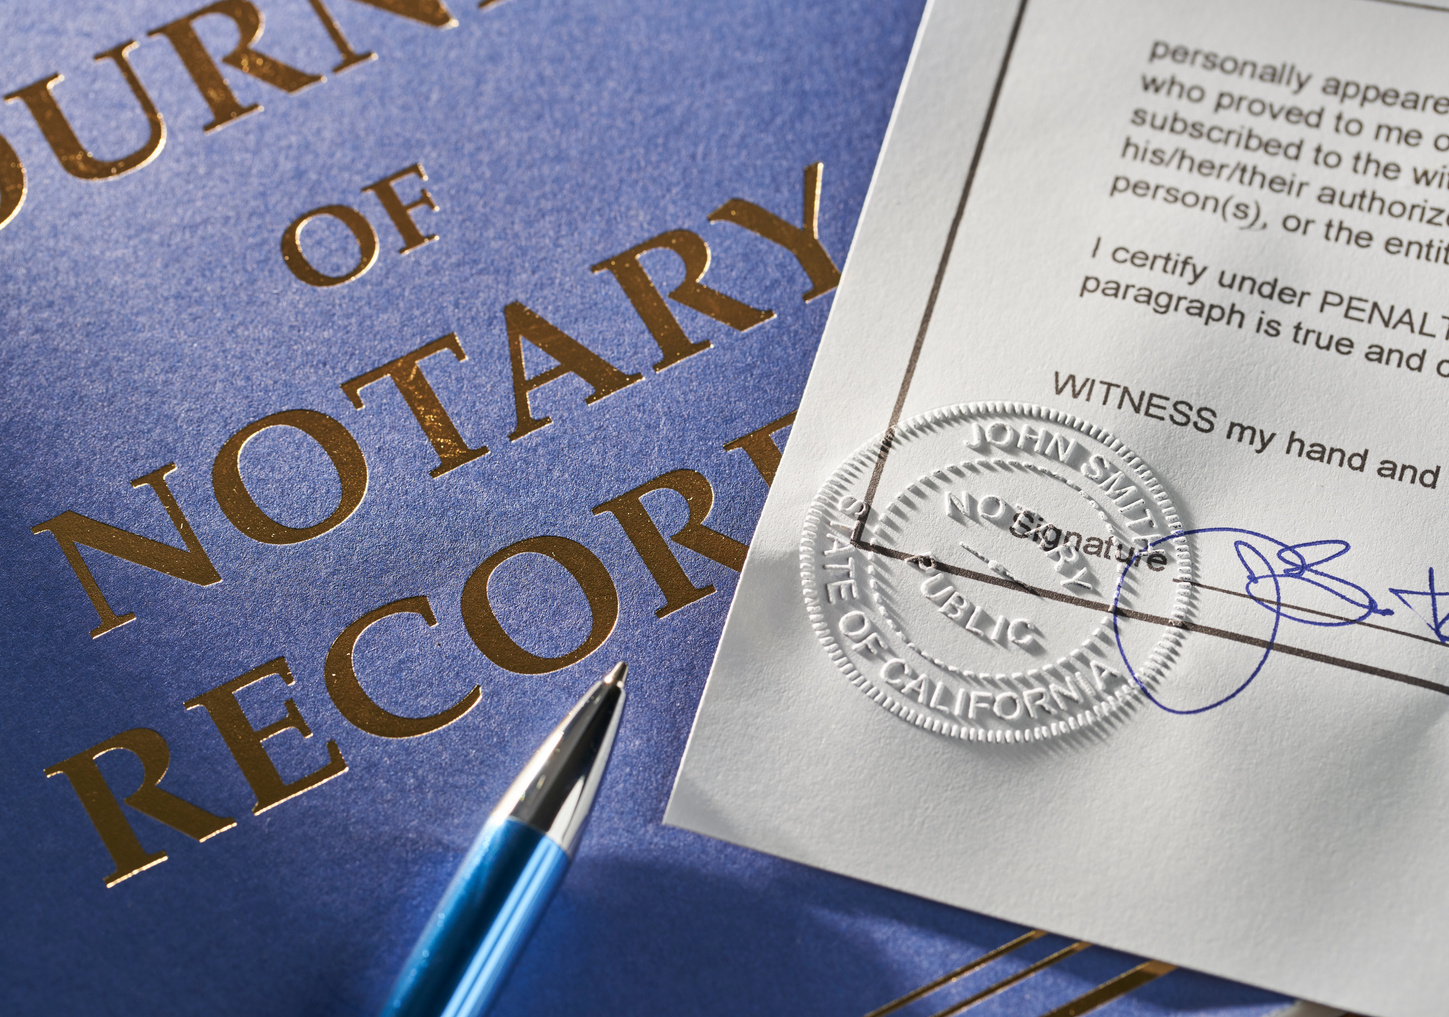 Notary Public: Seal embossed on document with journal